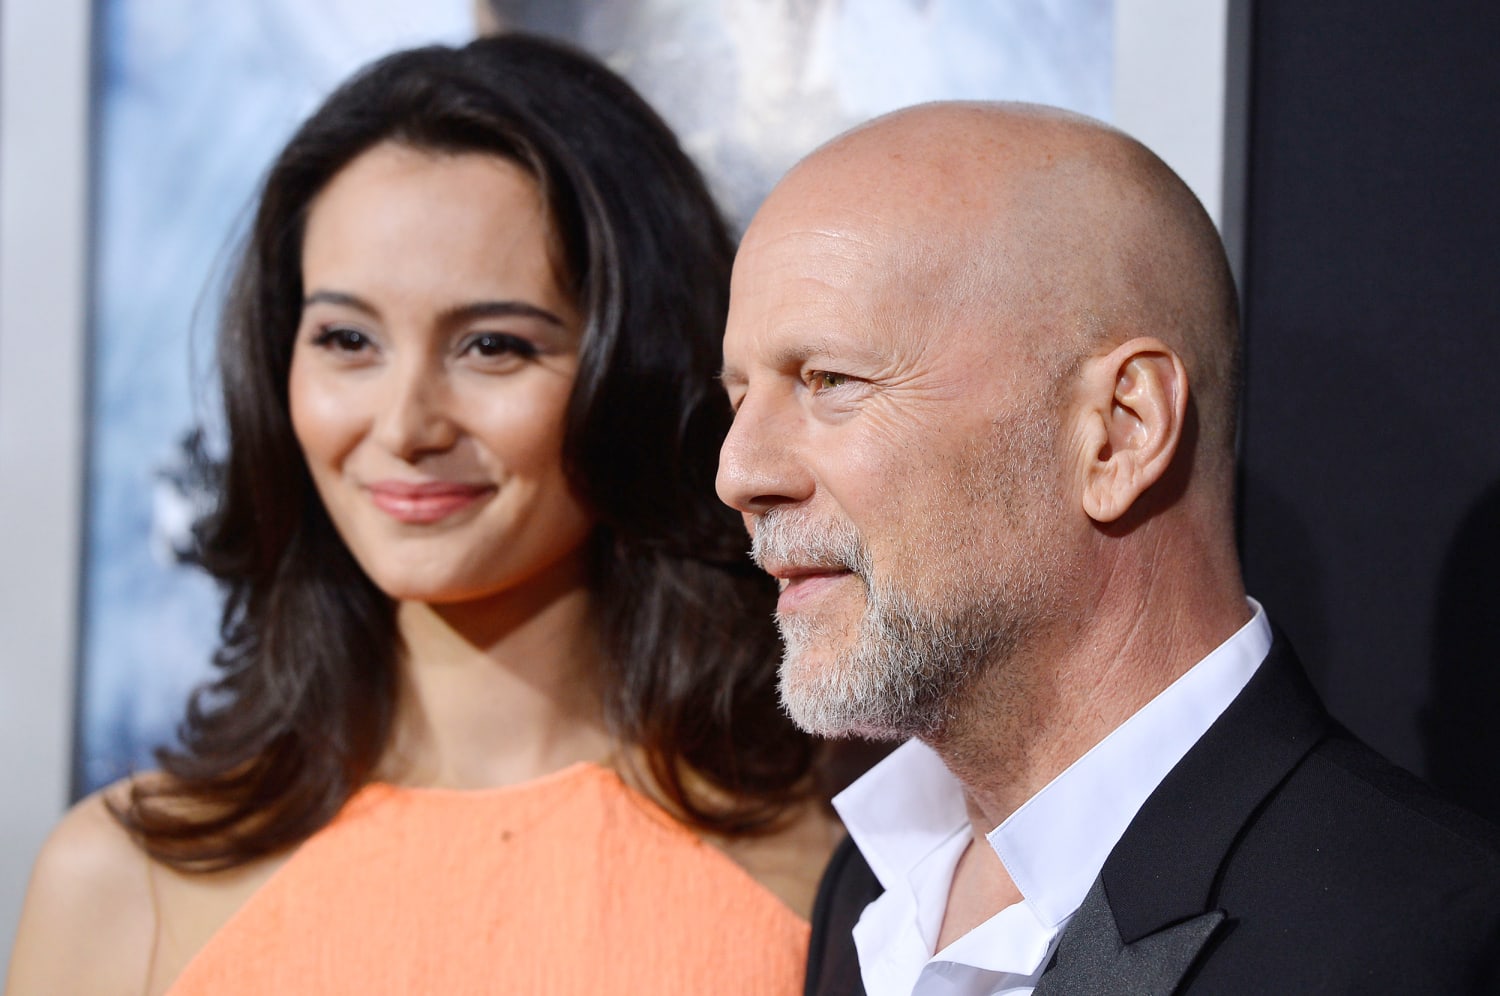 Bruce Willis’ wife tells paparazzi to stop yelling at him after dementia diagnosis